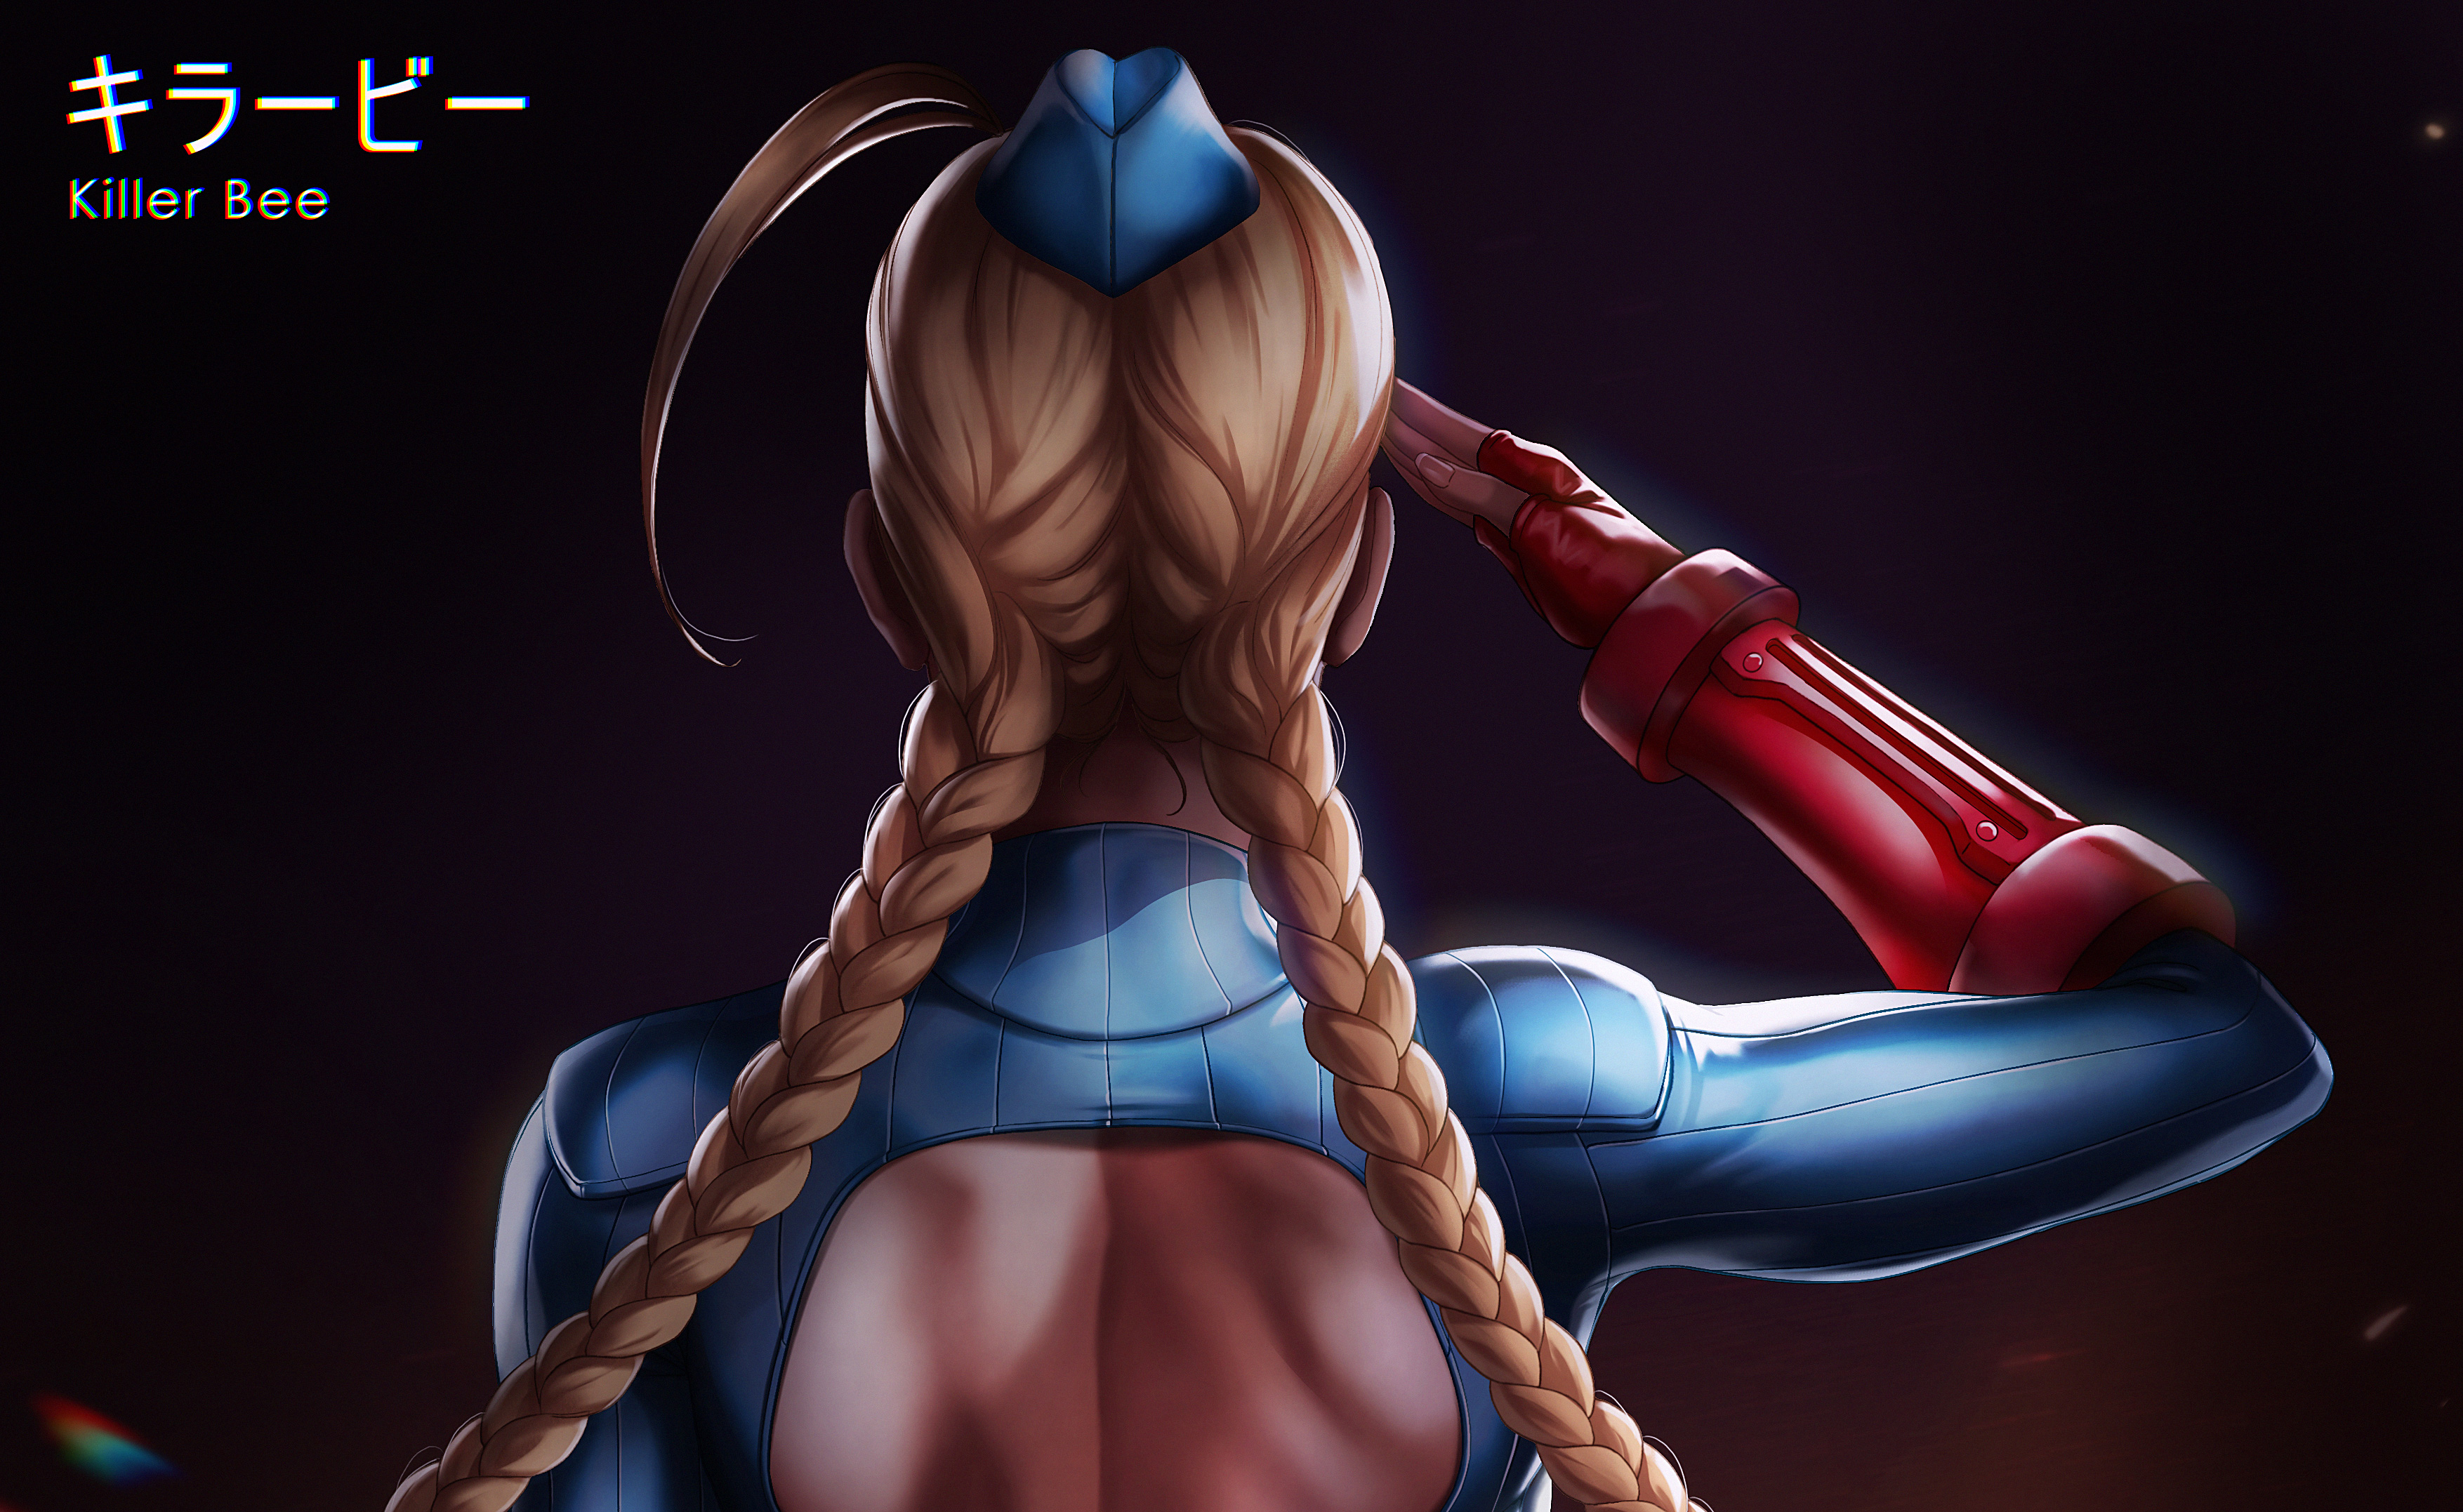 Cammy White Street Fighter Video Game Girls Video Games Anime Girls Anime Salute Military Soldier Un 3508x2154